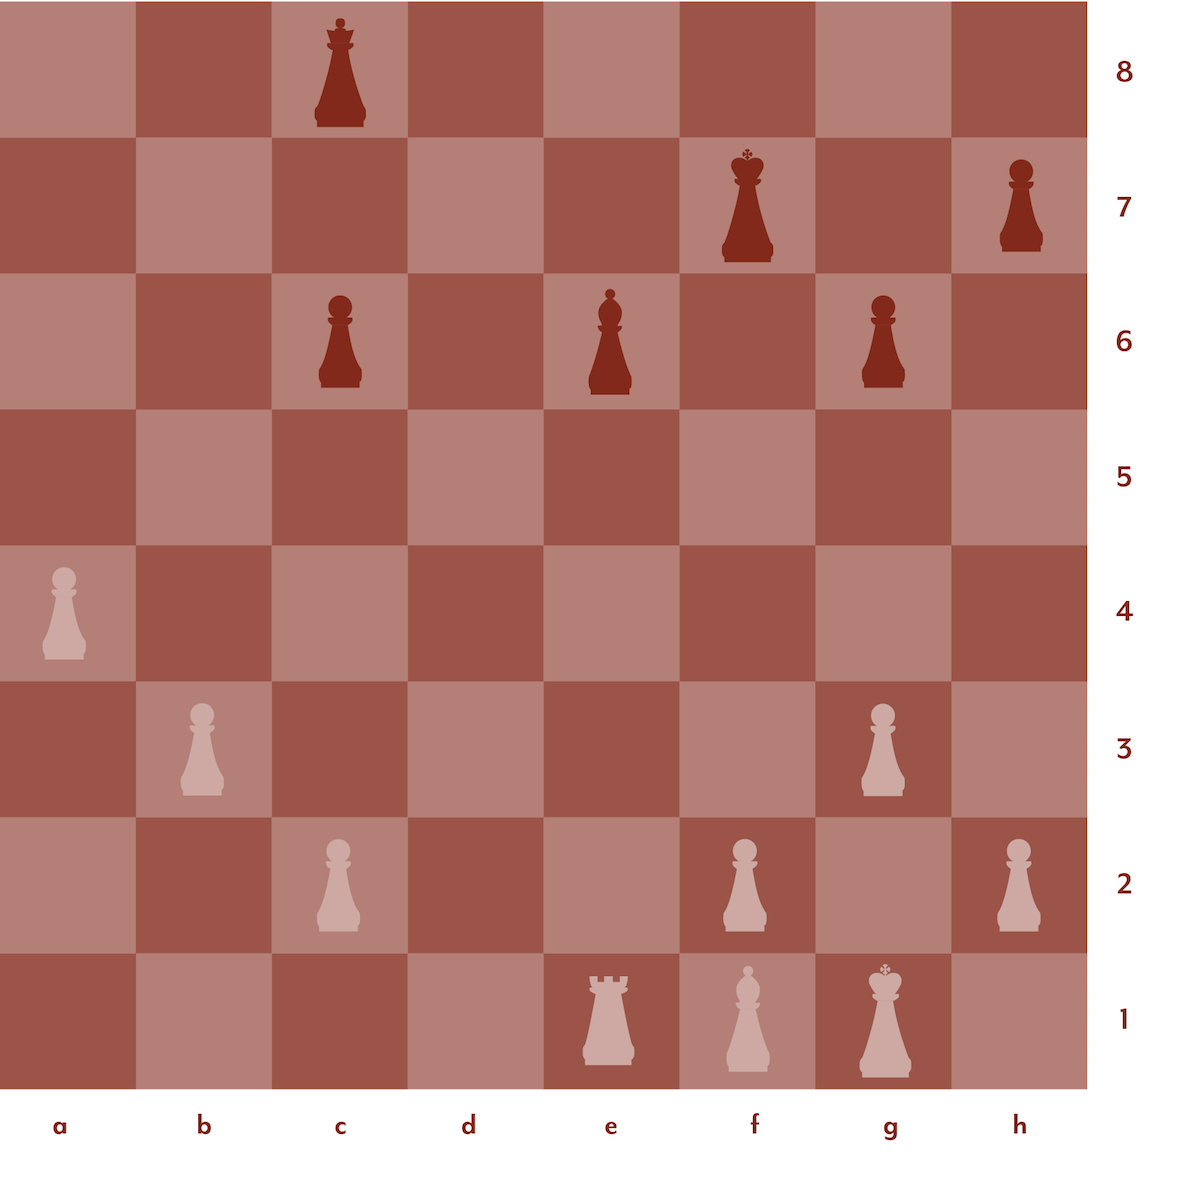 Skewer in chess attacks two pieces, Lifestyles